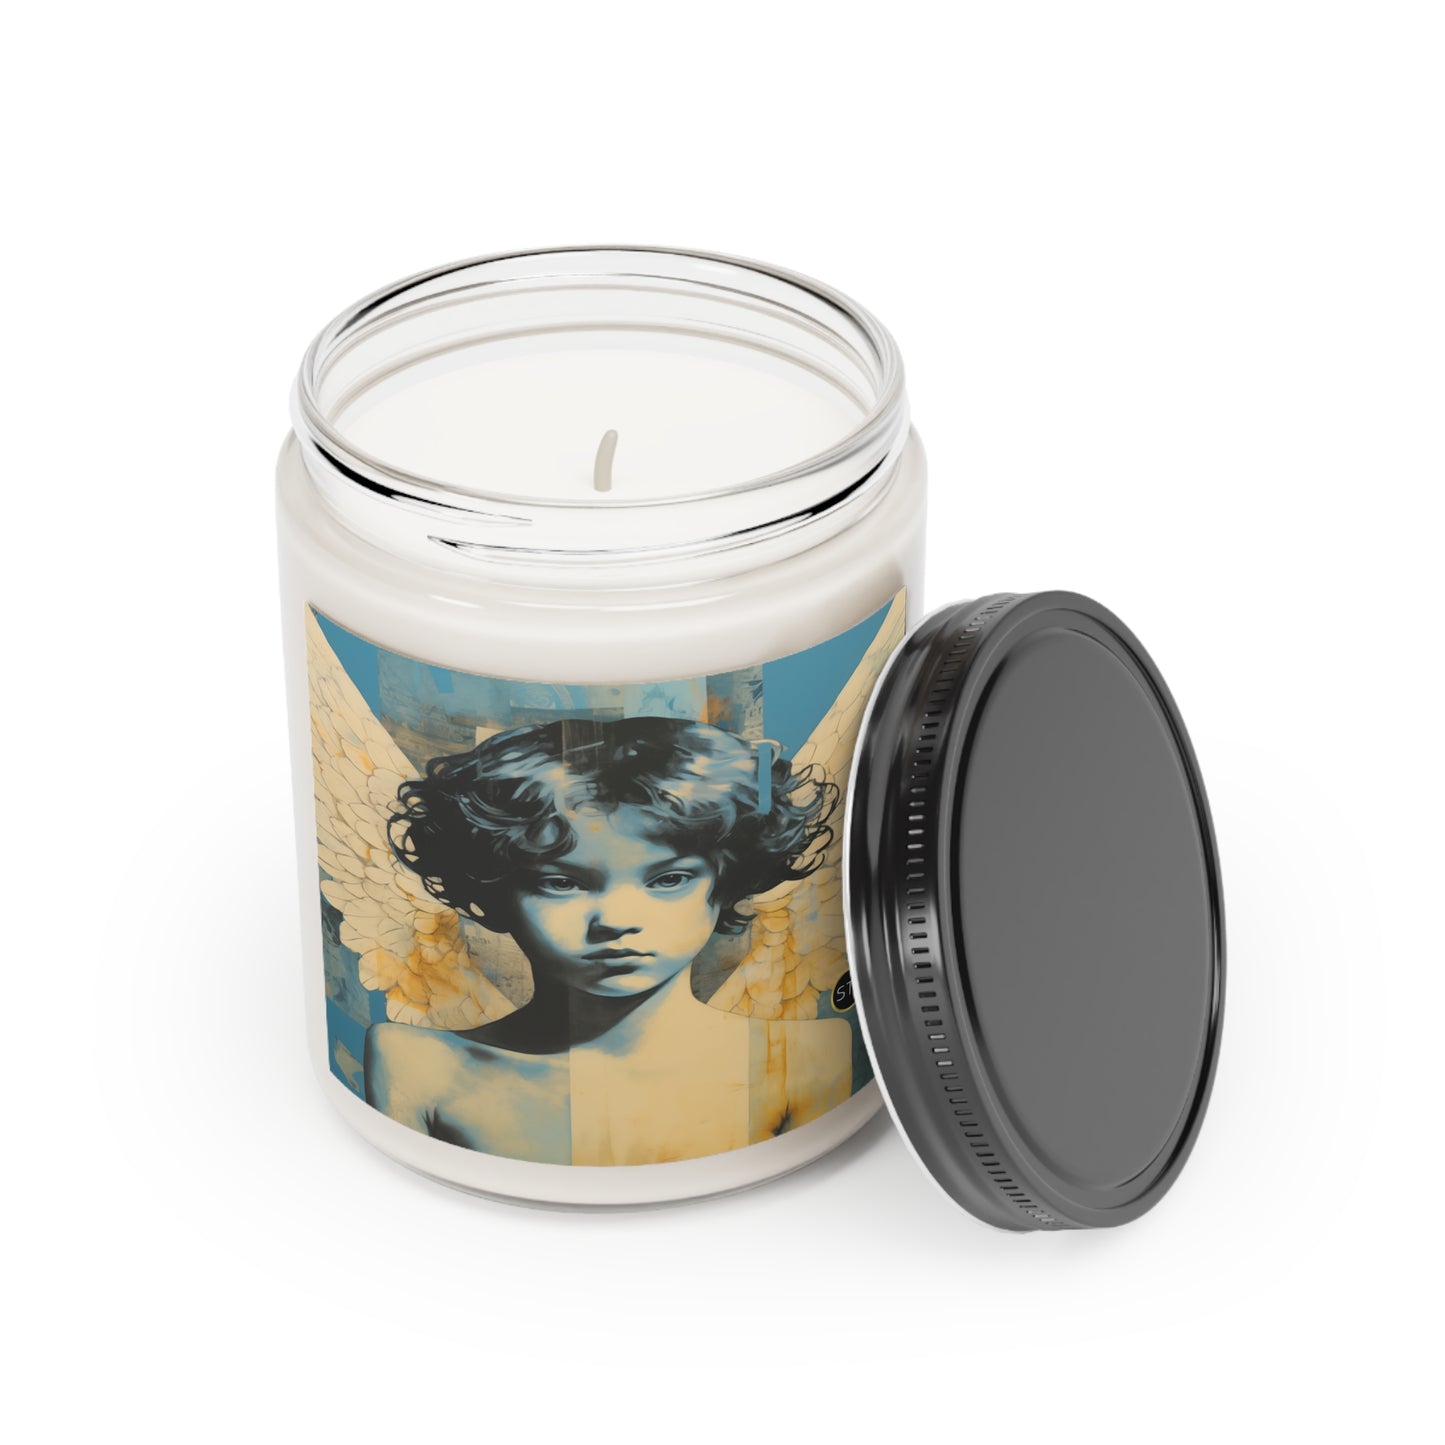 Angel Boy Hand-Poured Vegan Soy Scented Candle - Cinnamon, 9oz